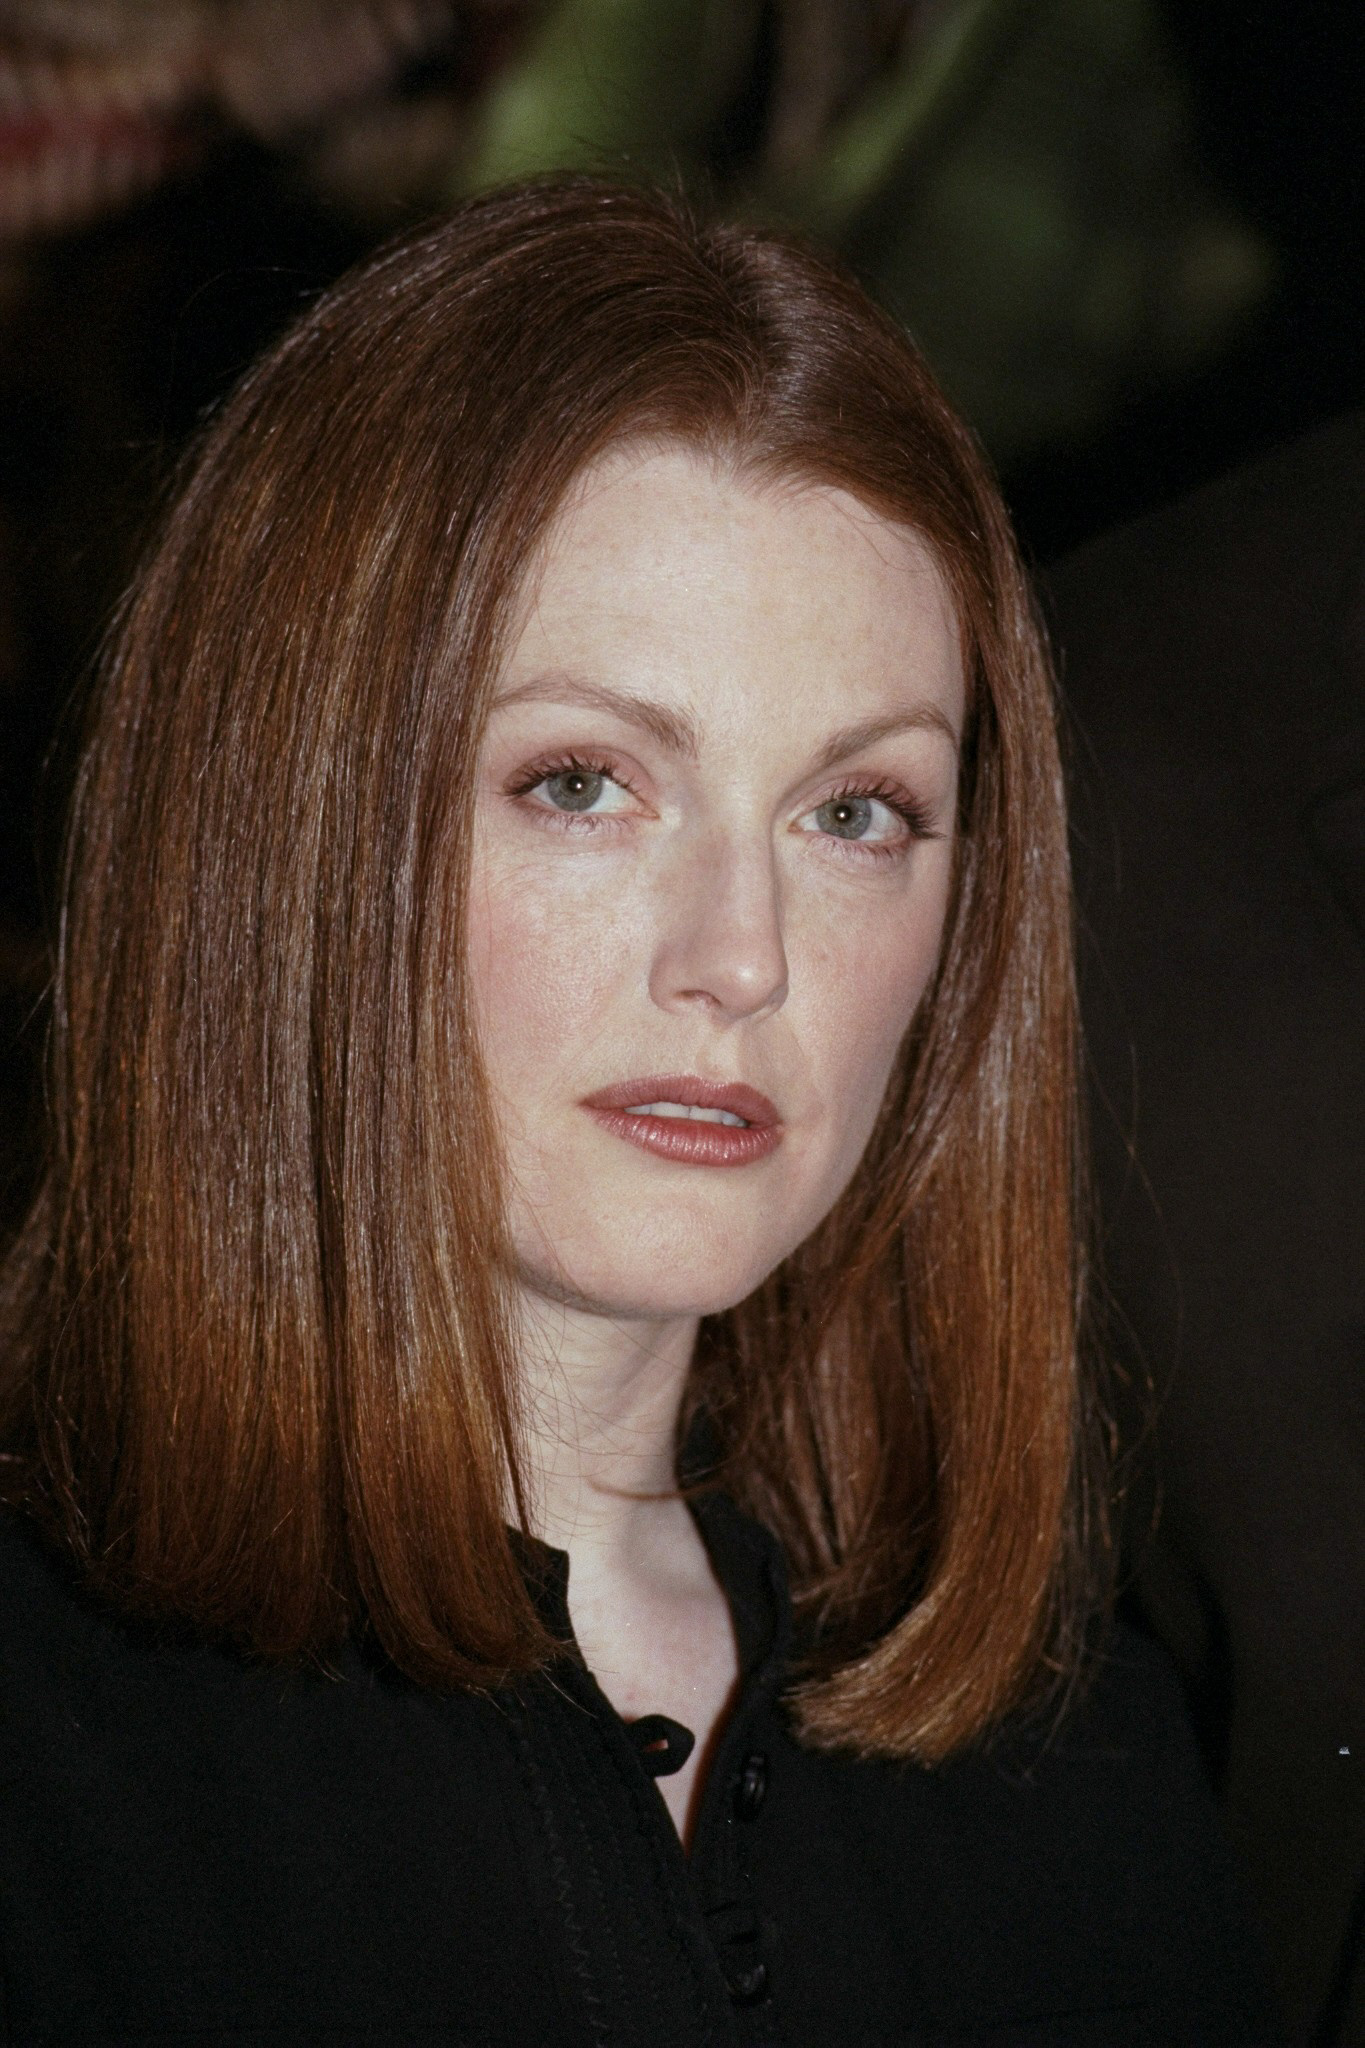 Julianne Moore on February 10, 1997 | Source: Getty Images